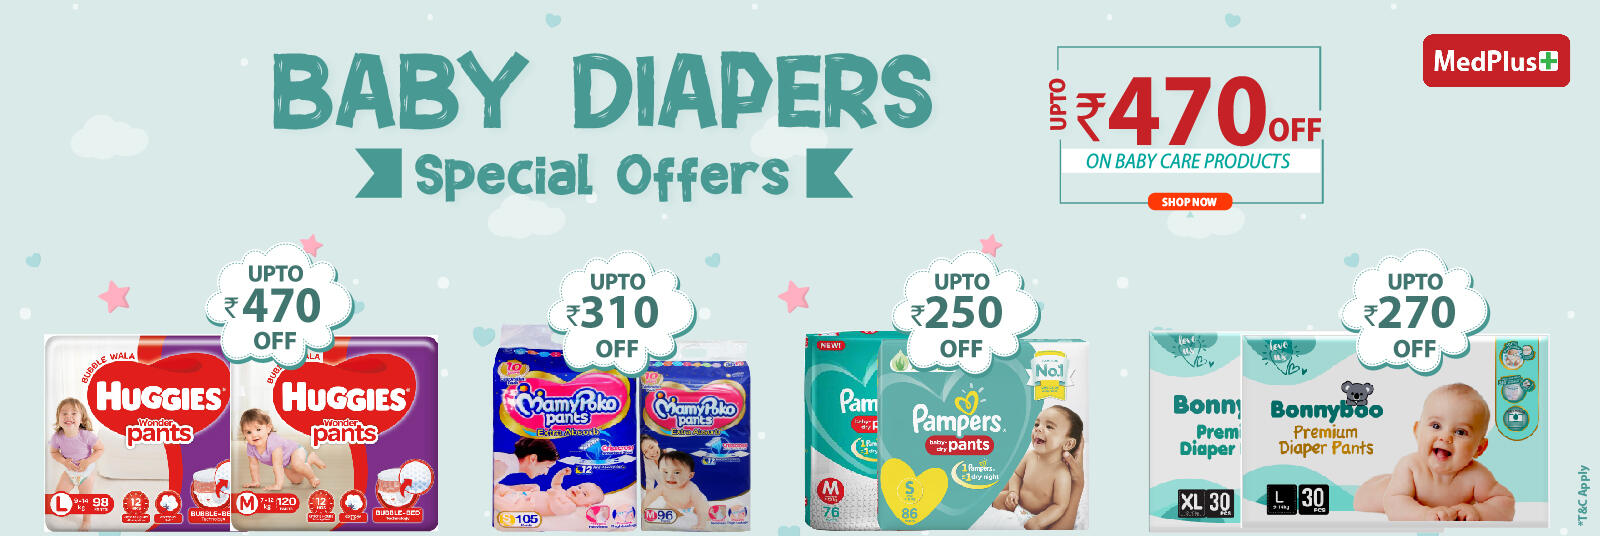 Baby Diapers Upto Rs 470 Off